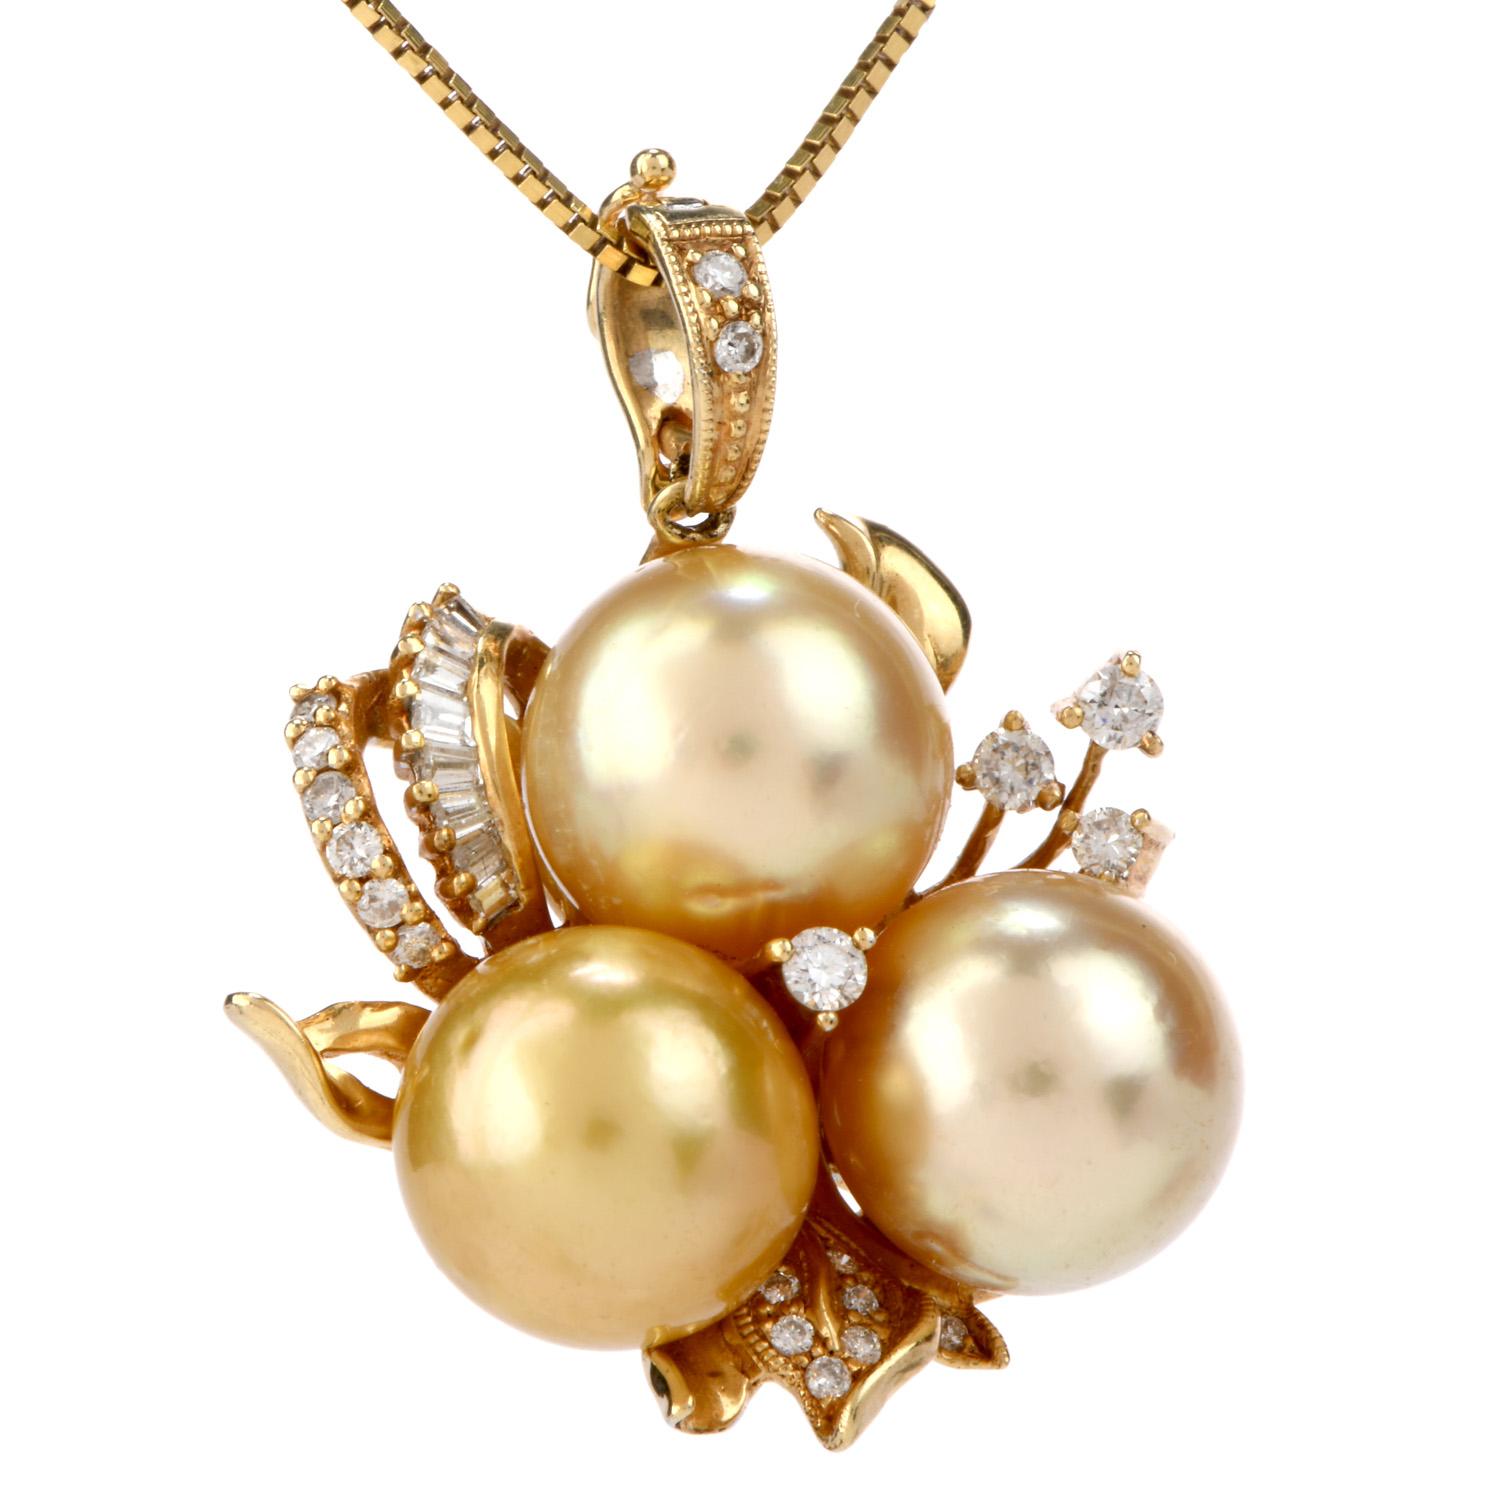 This diamond & pearl pendant enhancer crafted in solid 14 karat yellow gold incorporates a captivating floral motif profile resplendent in 0.65 carats of round and baguette cut  diamonds graded H-I color and VS clarity, surmounting an eye-catching